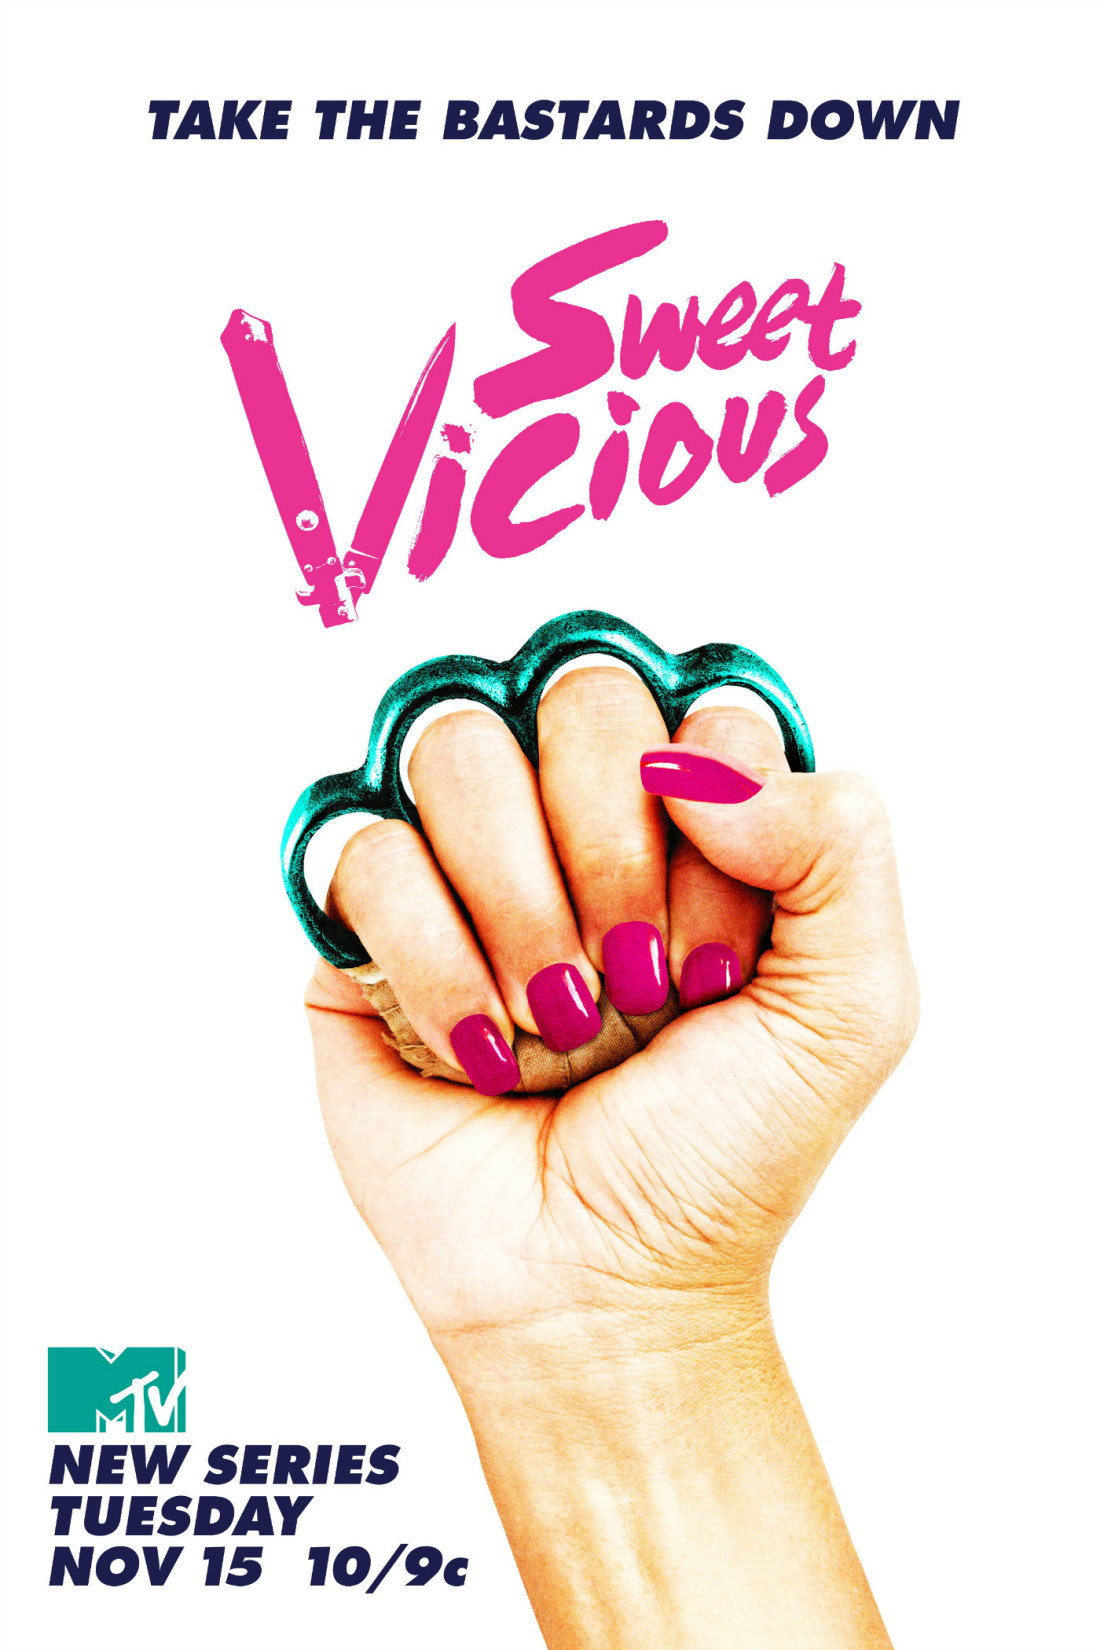 sweet vicious key art mtv Dont let the nail polish fool you, Sweet/Vicious is here to kick some butt